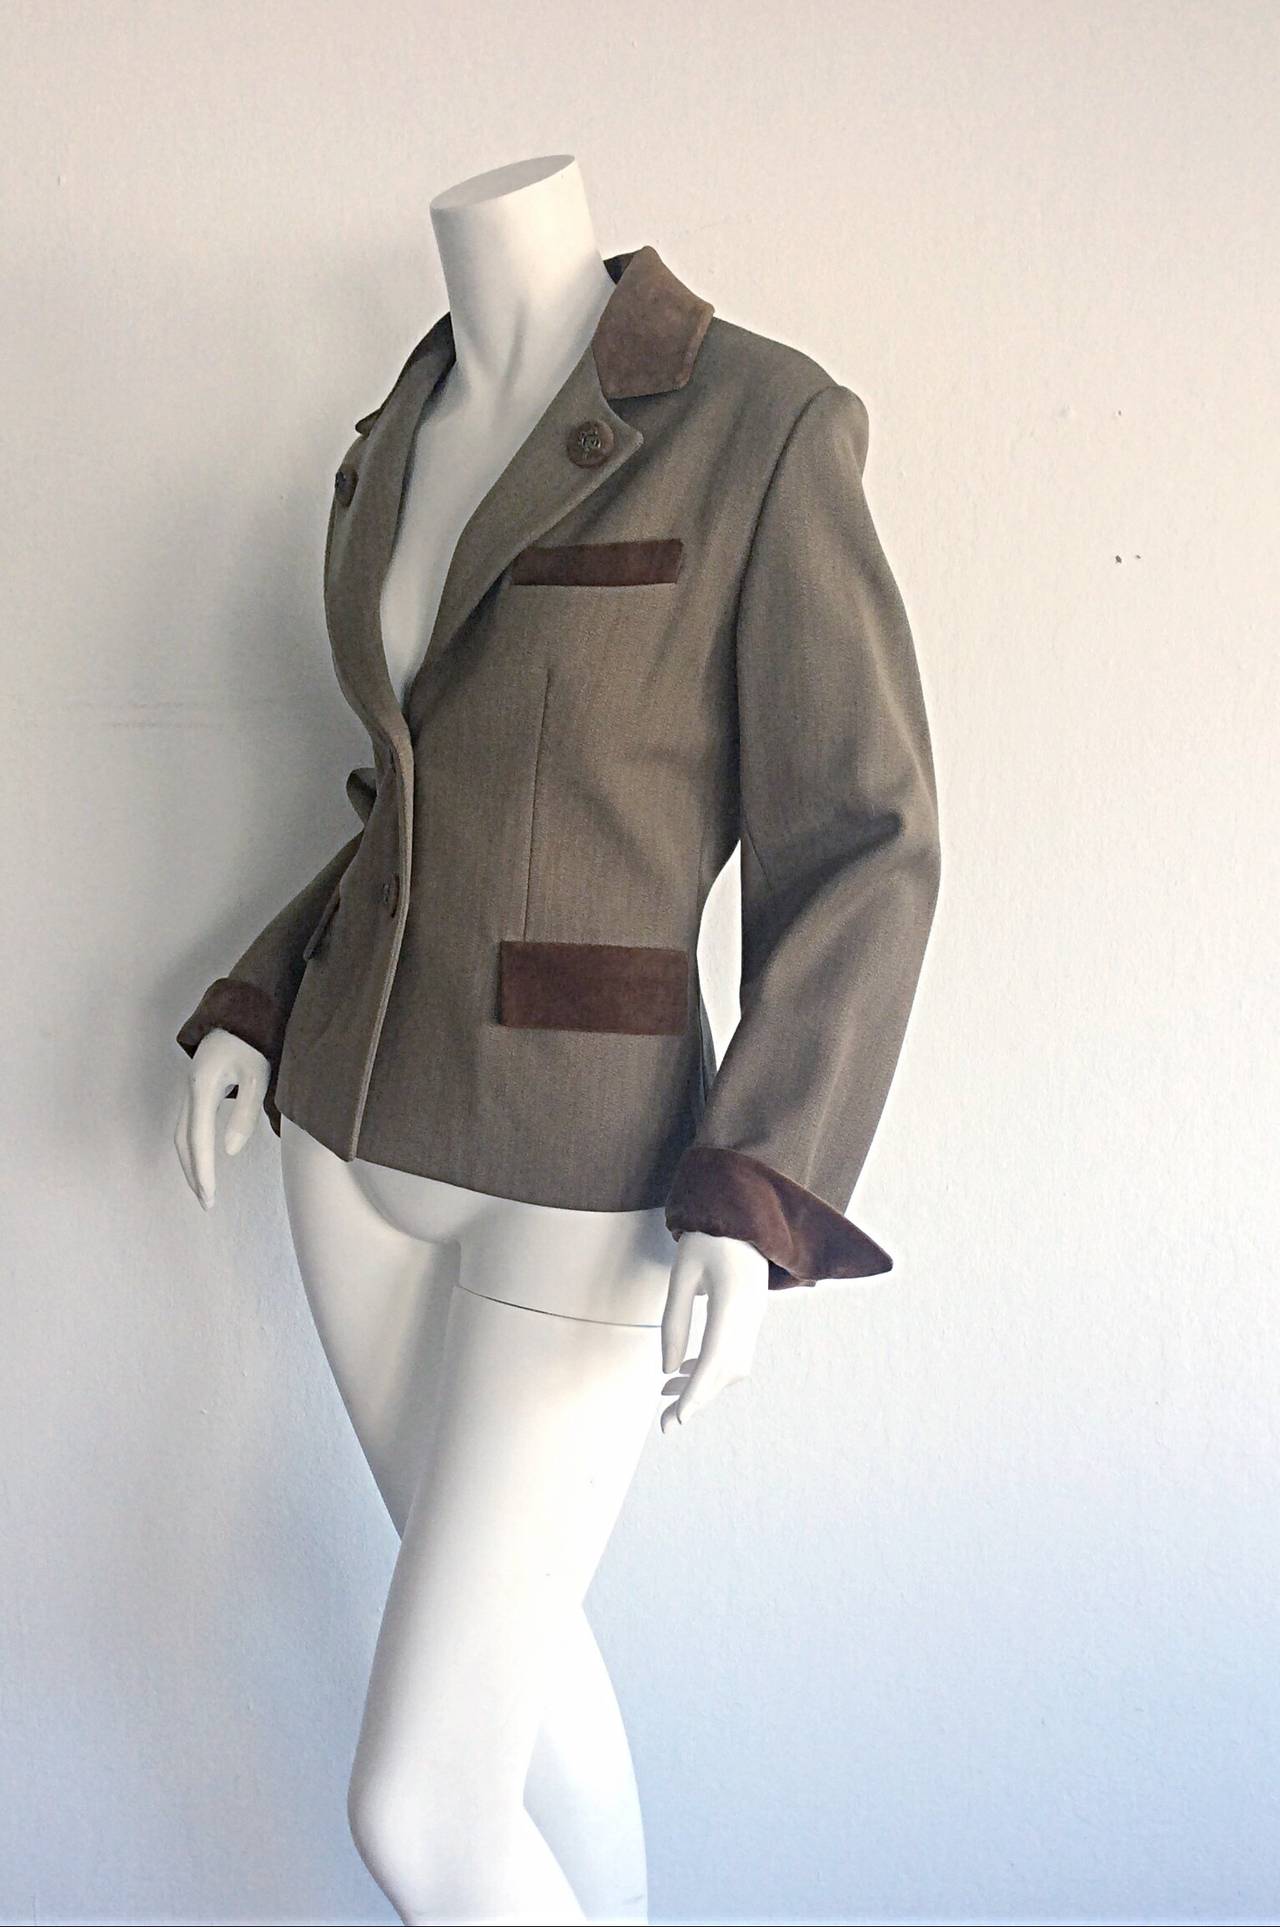 Incredible vintage Hermes Equestrian riding jacket! Luxurious fine wool, with velvet accents at pockets, cuffs, and lapel. Iconic signature buttons. Looks great with jeans, or perfect with a pencil skirt, or trousers.  Fully lined. In great